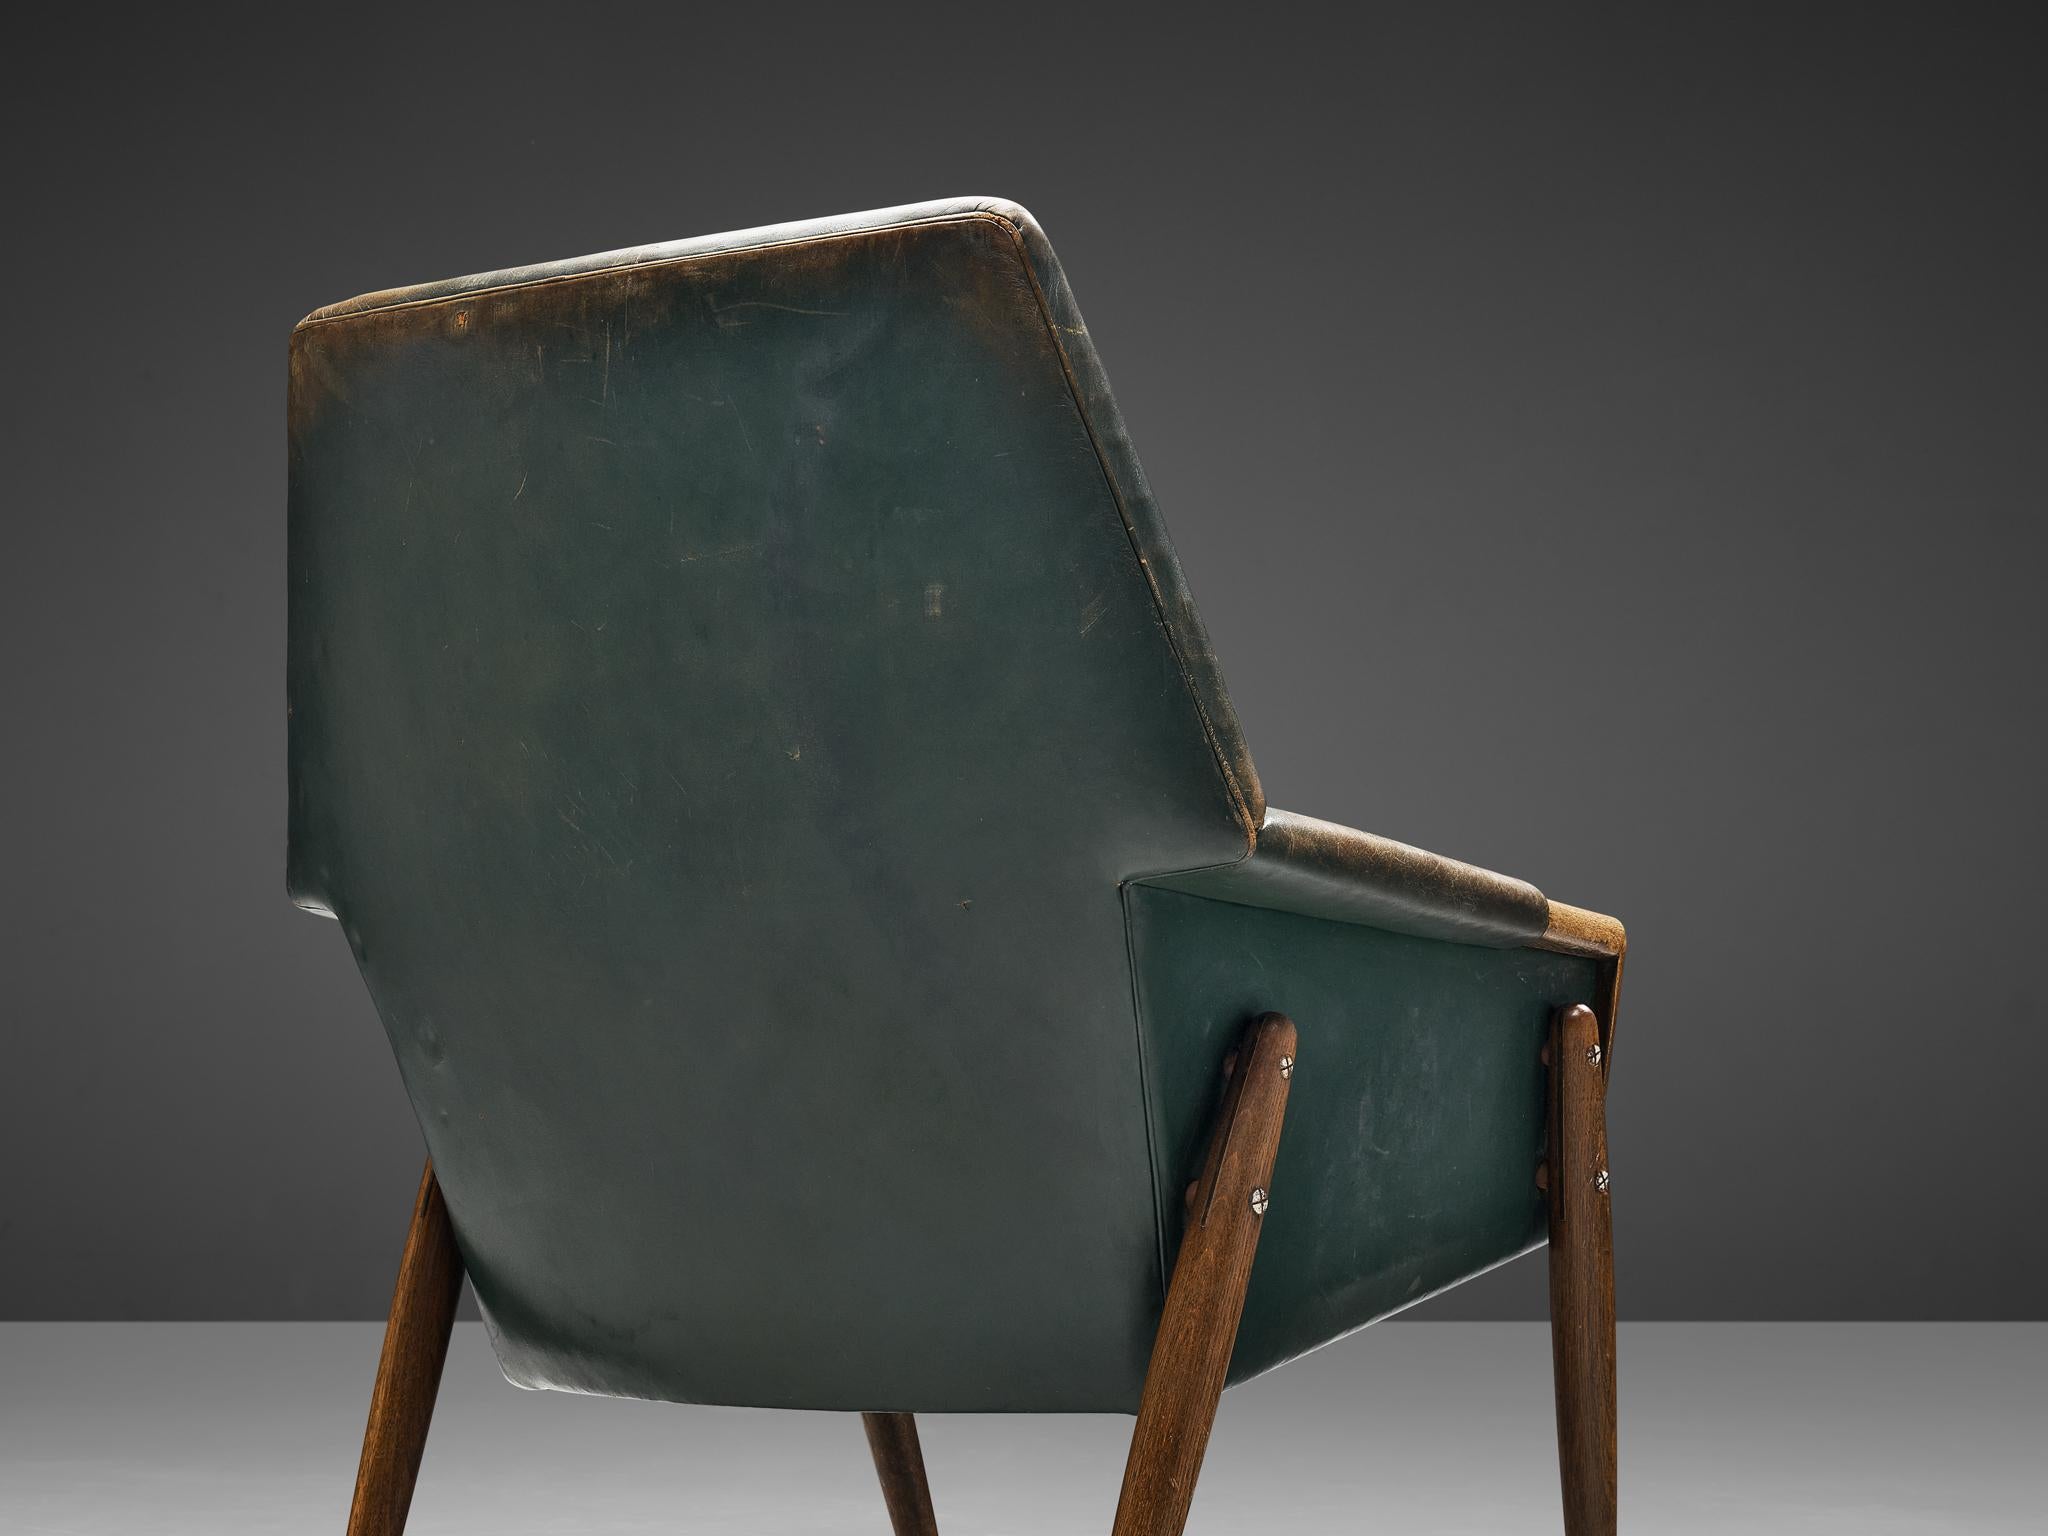 Wood Danish Lounge Chair in Patinated Green Leather